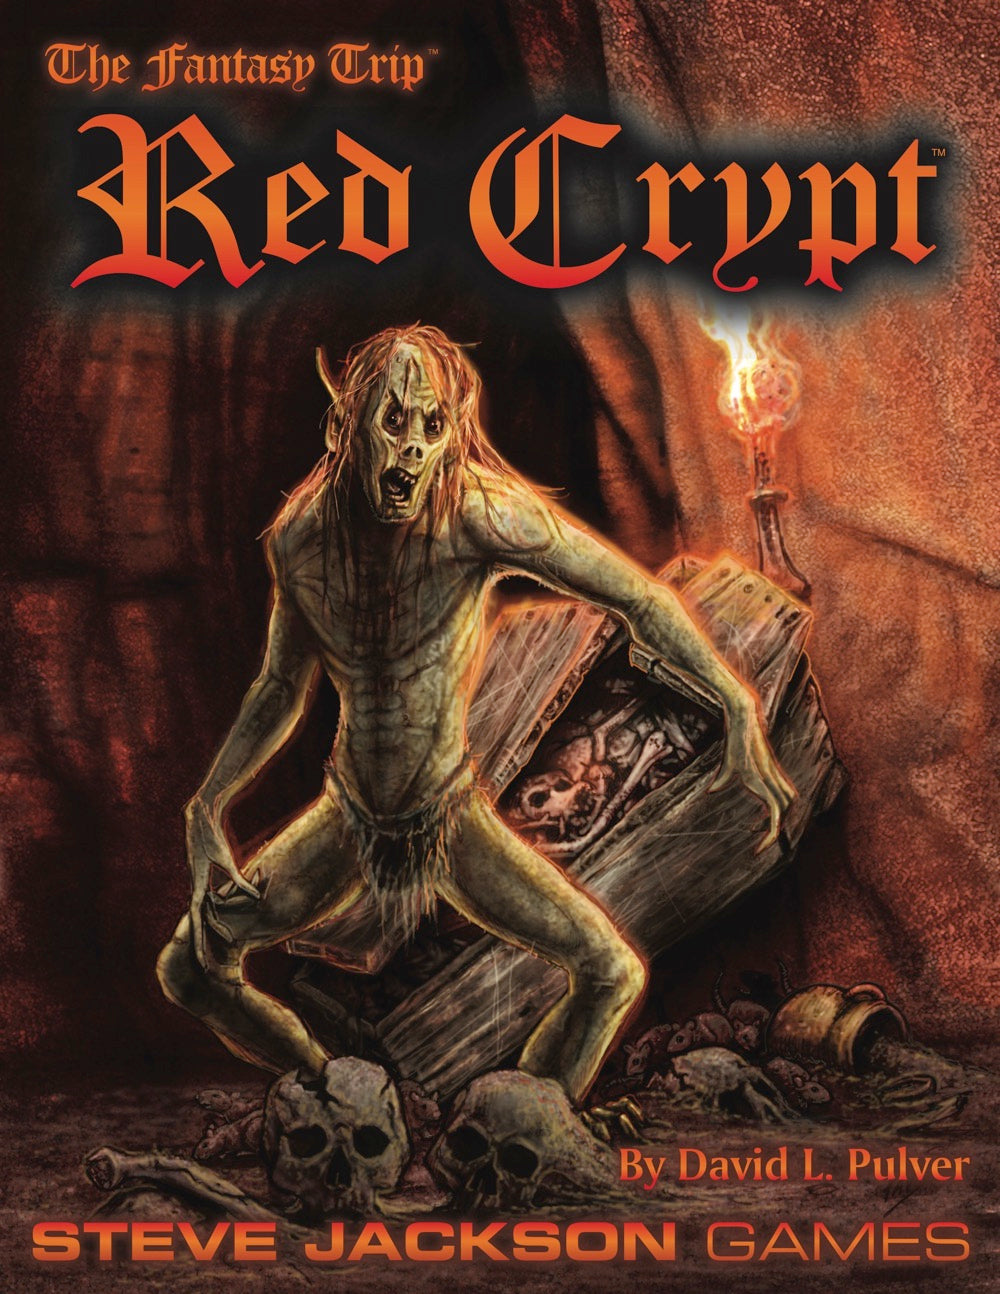 The Fantasy Trip: Red Crypt